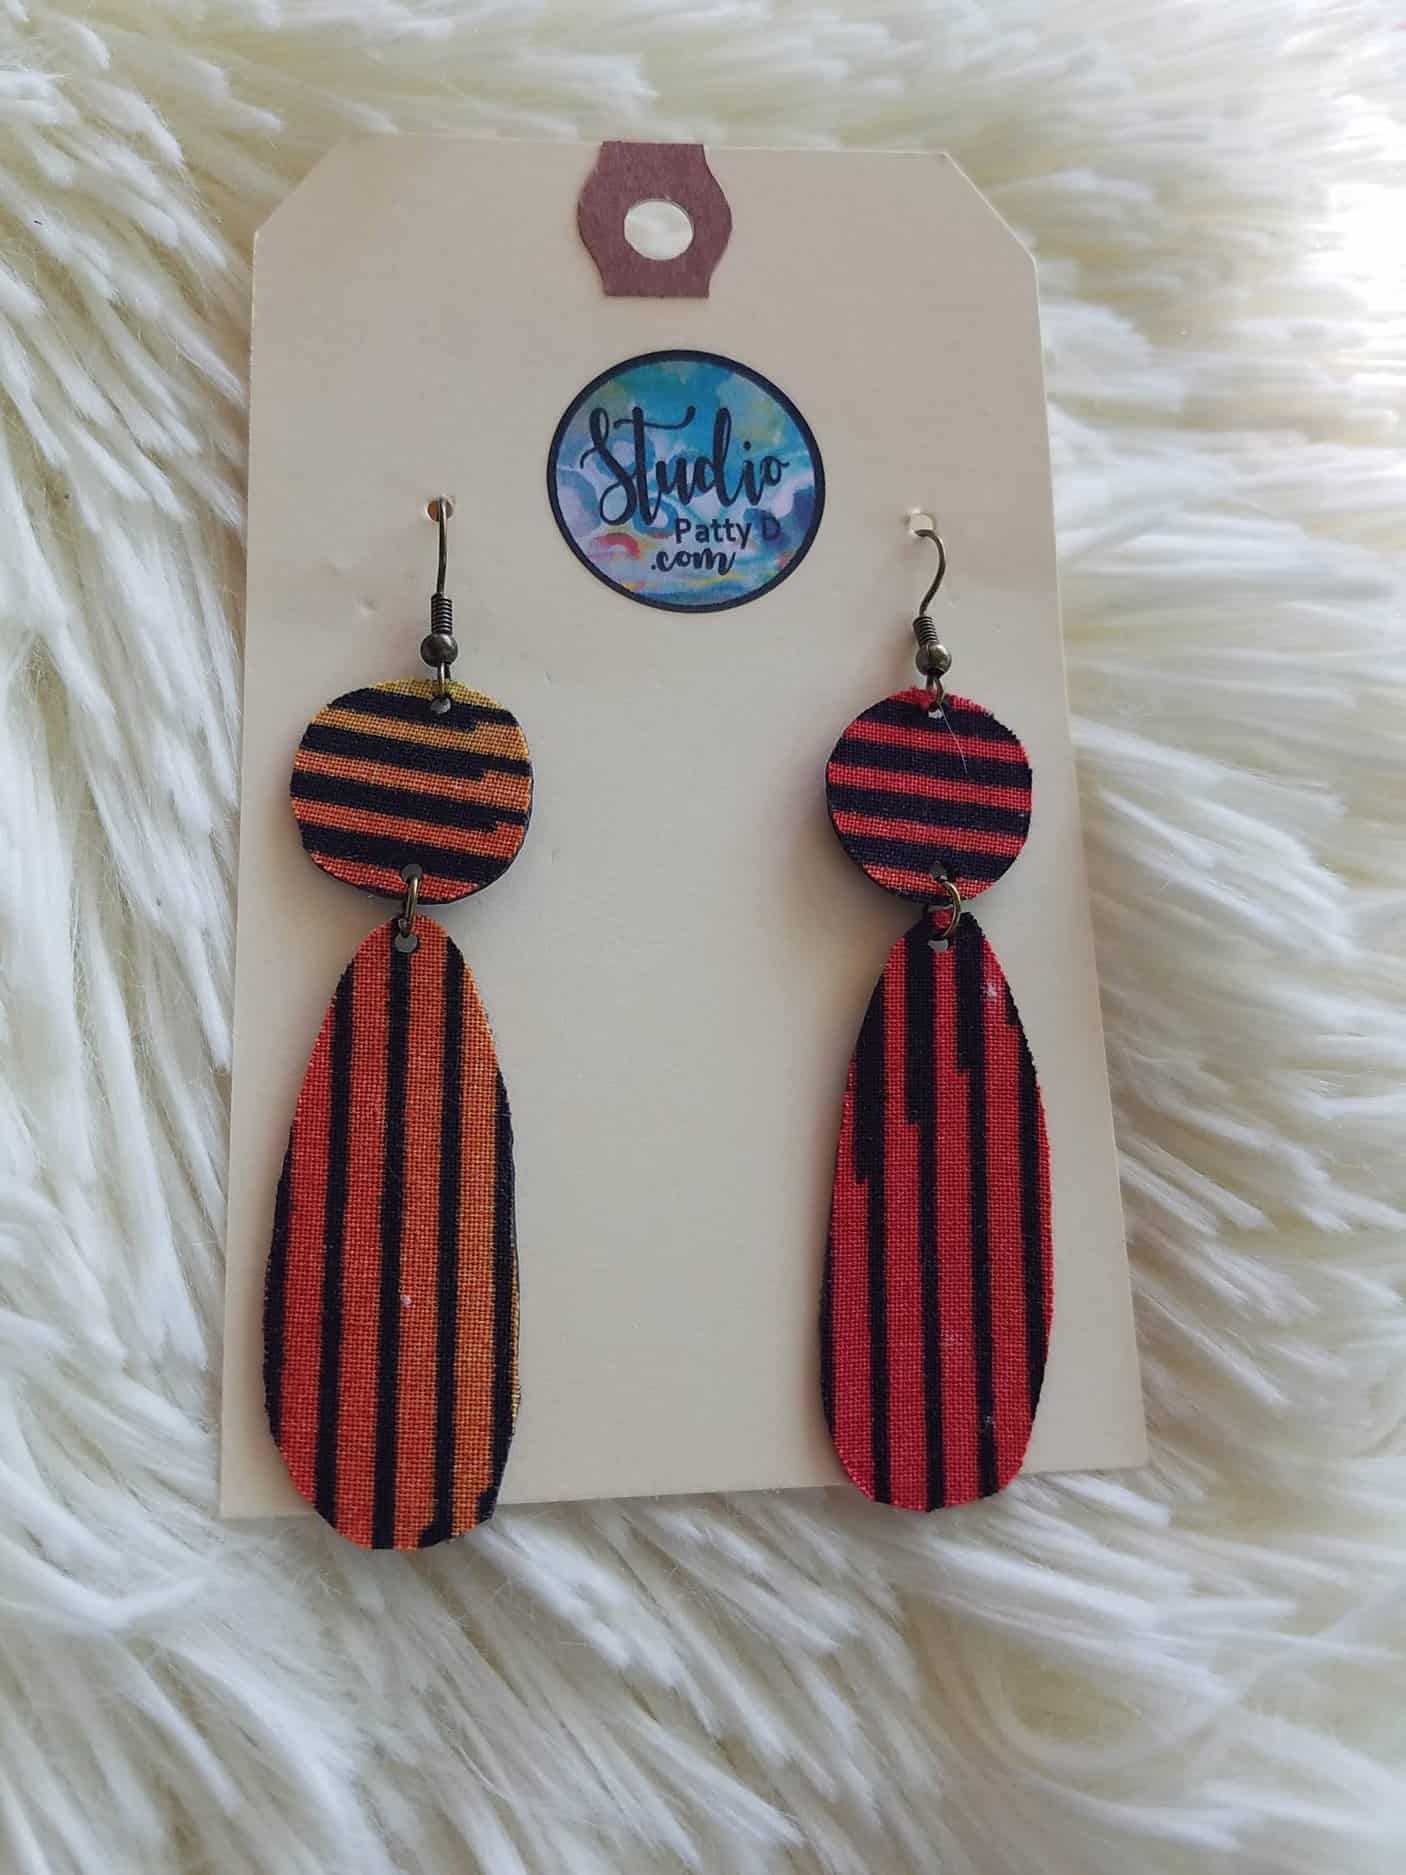 This Statement Earrings - striped harvest is made with love by Studio Patty D! Shop more unique gift ideas today with Spots Initiatives, the best way to support creators.